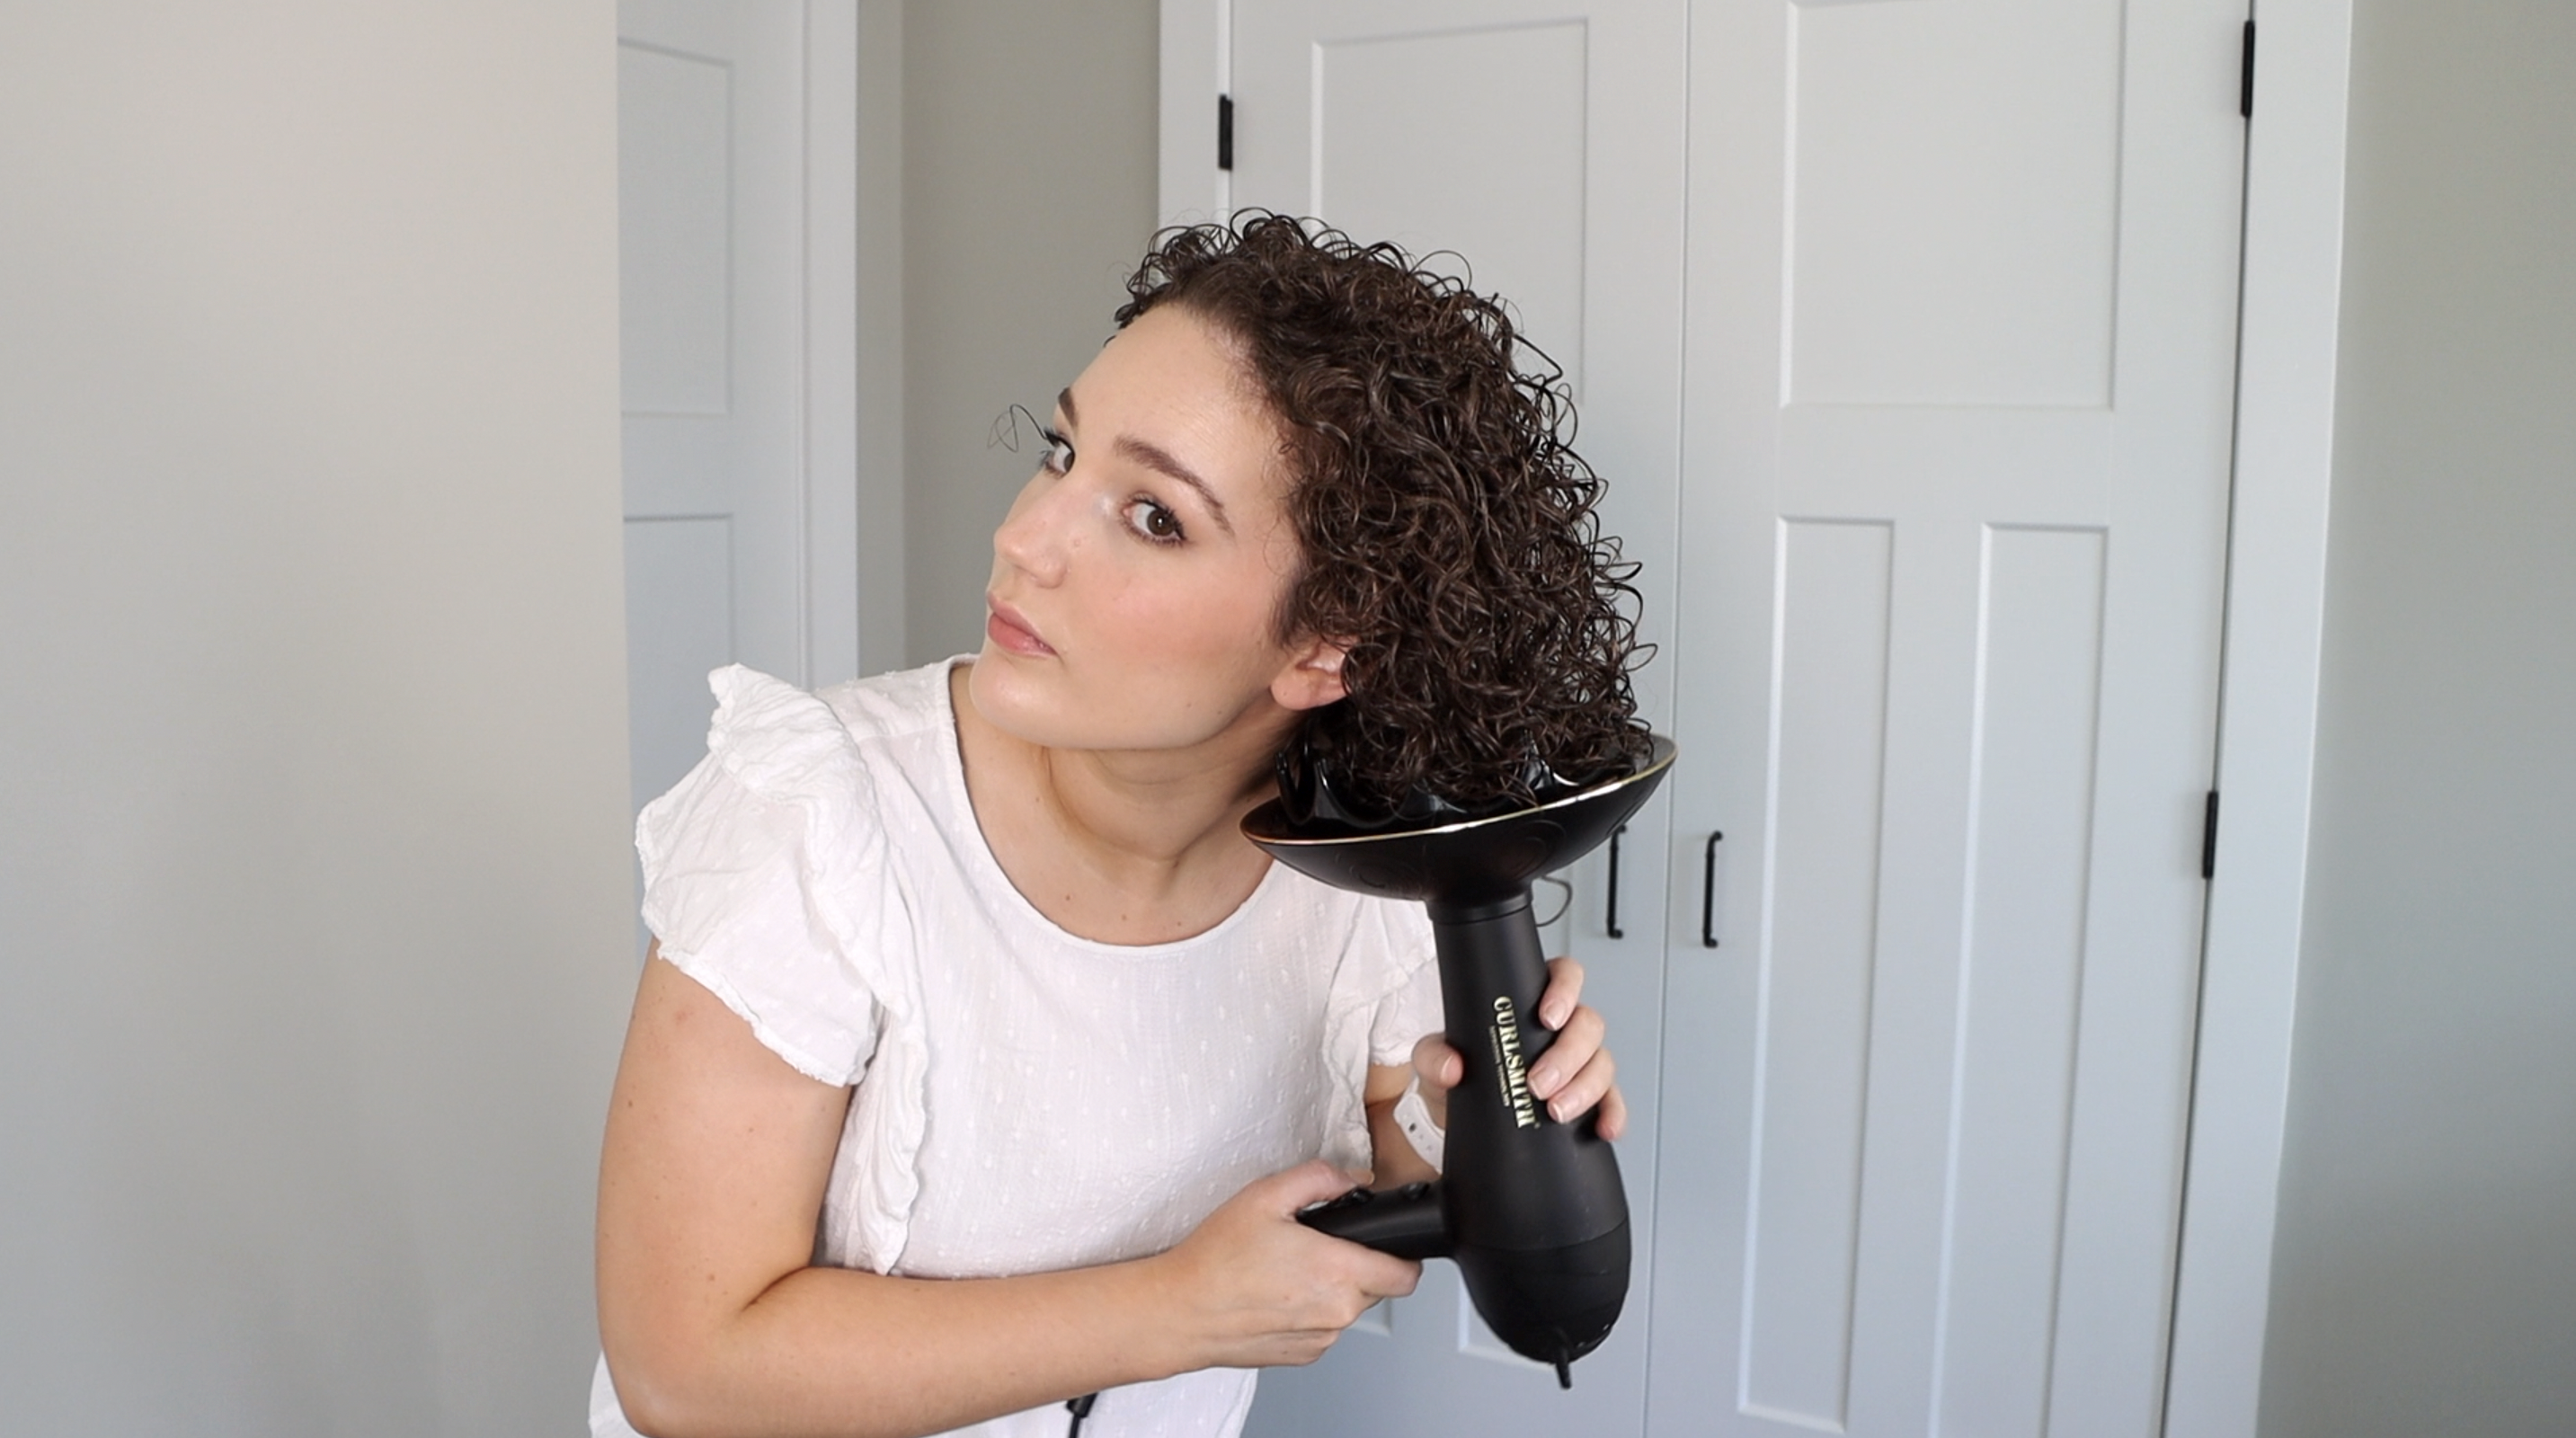 How To Diffuse Curly Hair